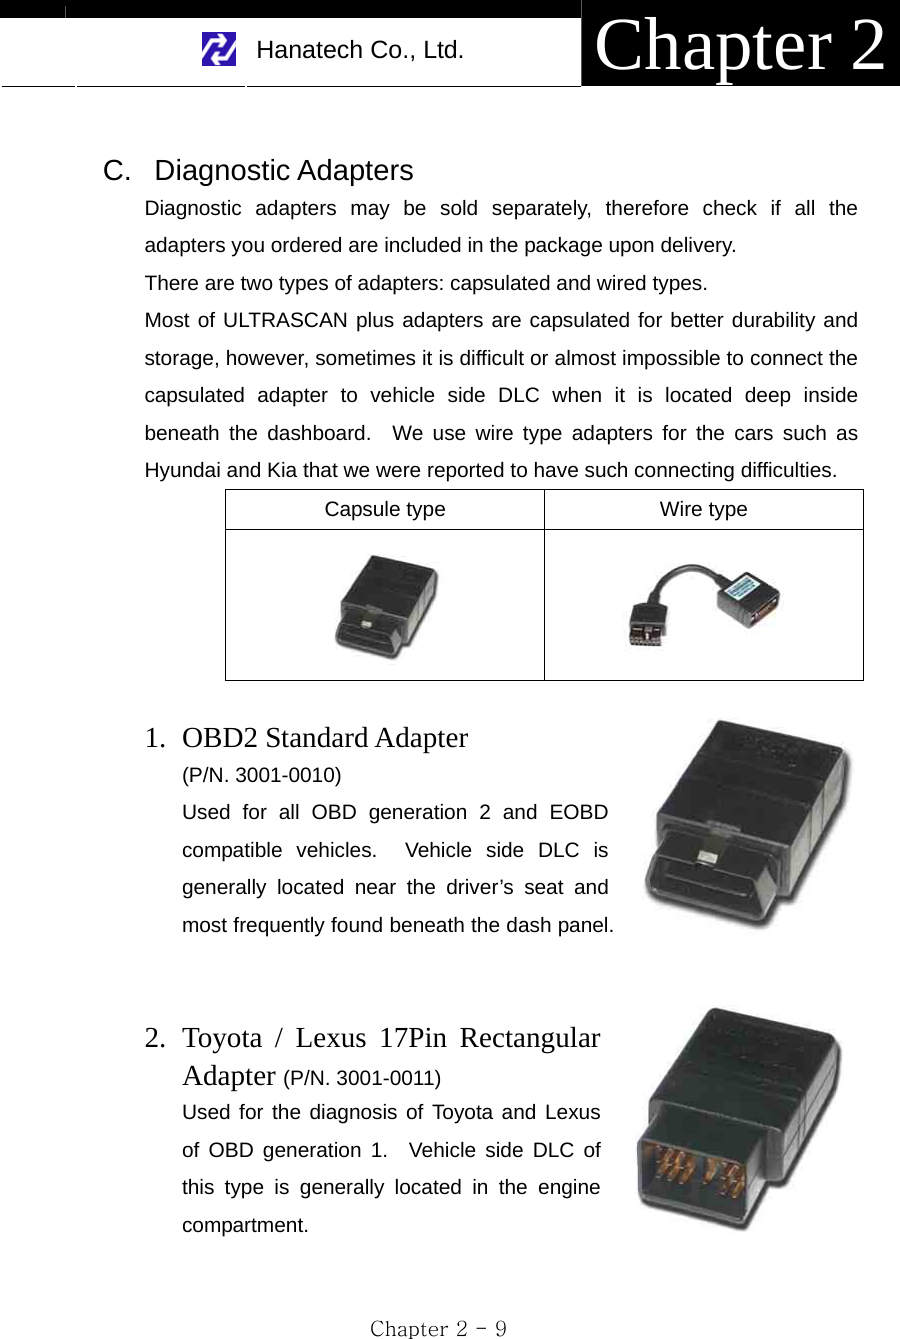     Hanatech Co., Ltd.  Chapter 2 Chapter 2 - 9  C. Diagnostic Adapters Diagnostic adapters may be sold separately, therefore check if all the adapters you ordered are included in the package upon delivery.     There are two types of adapters: capsulated and wired types.   Most of ULTRASCAN plus adapters are capsulated for better durability and storage, however, sometimes it is difficult or almost impossible to connect the capsulated adapter to vehicle side DLC when it is located deep inside beneath the dashboard.  We use wire type adapters for the cars such as Hyundai and Kia that we were reported to have such connecting difficulties.   Capsule type  Wire type    1. OBD2 Standard Adapter   (P/N. 3001-0010) Used for all OBD generation 2 and EOBD compatible vehicles.  Vehicle side DLC is generally located near the driver’s seat and most frequently found beneath the dash panel.   2. Toyota / Lexus 17Pin Rectangular Adapter (P/N. 3001-0011) Used for the diagnosis of Toyota and Lexus of OBD generation 1.  Vehicle side DLC of this type is generally located in the engine compartment.   